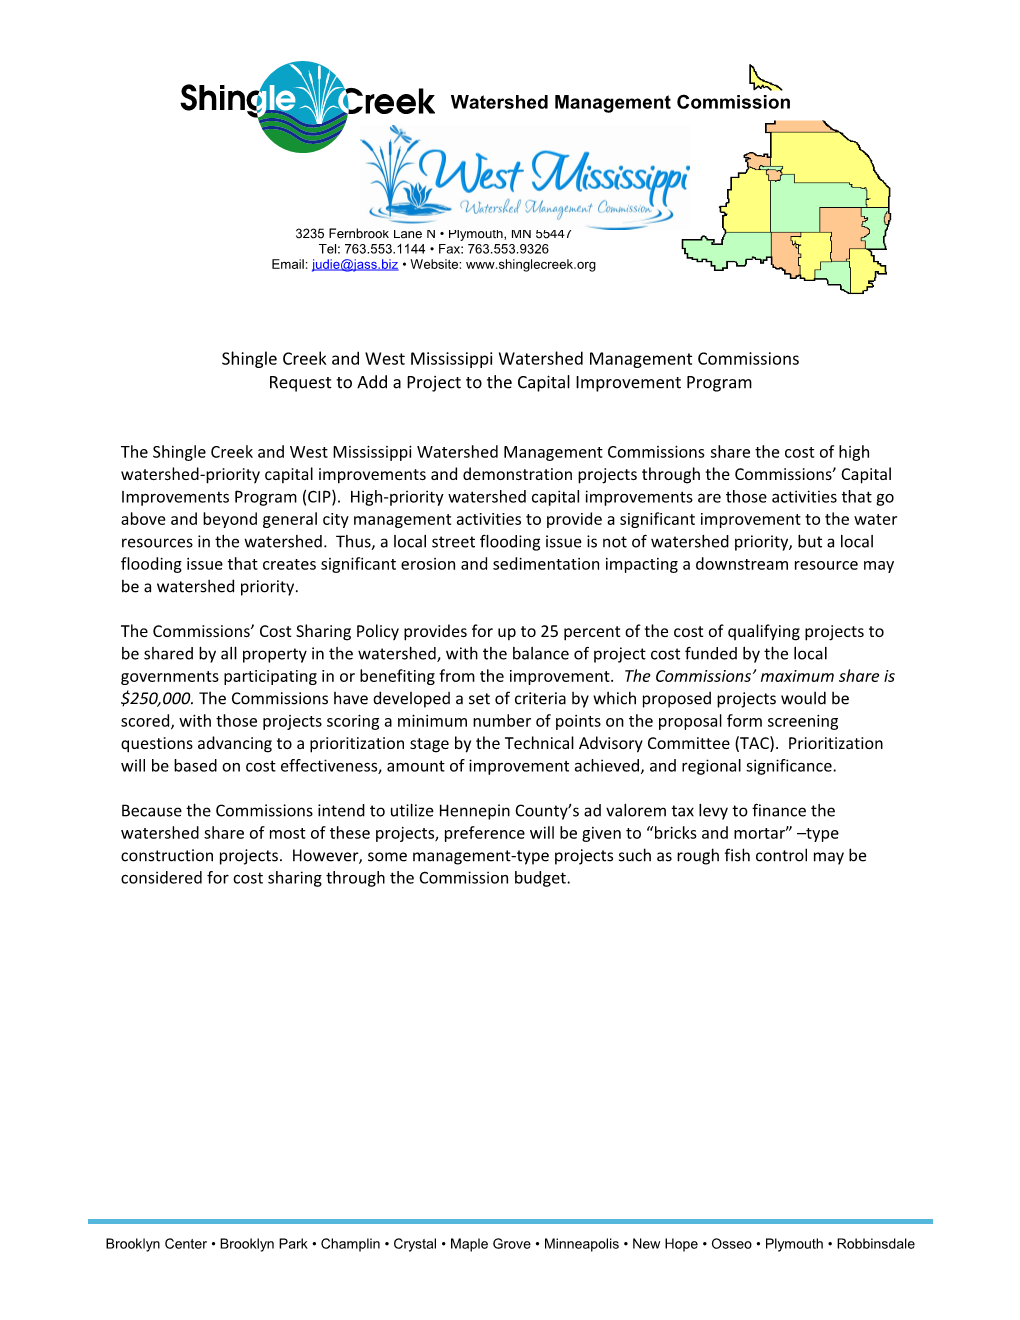 Shingle Creek and West Mississippi Watershed Management Commissions